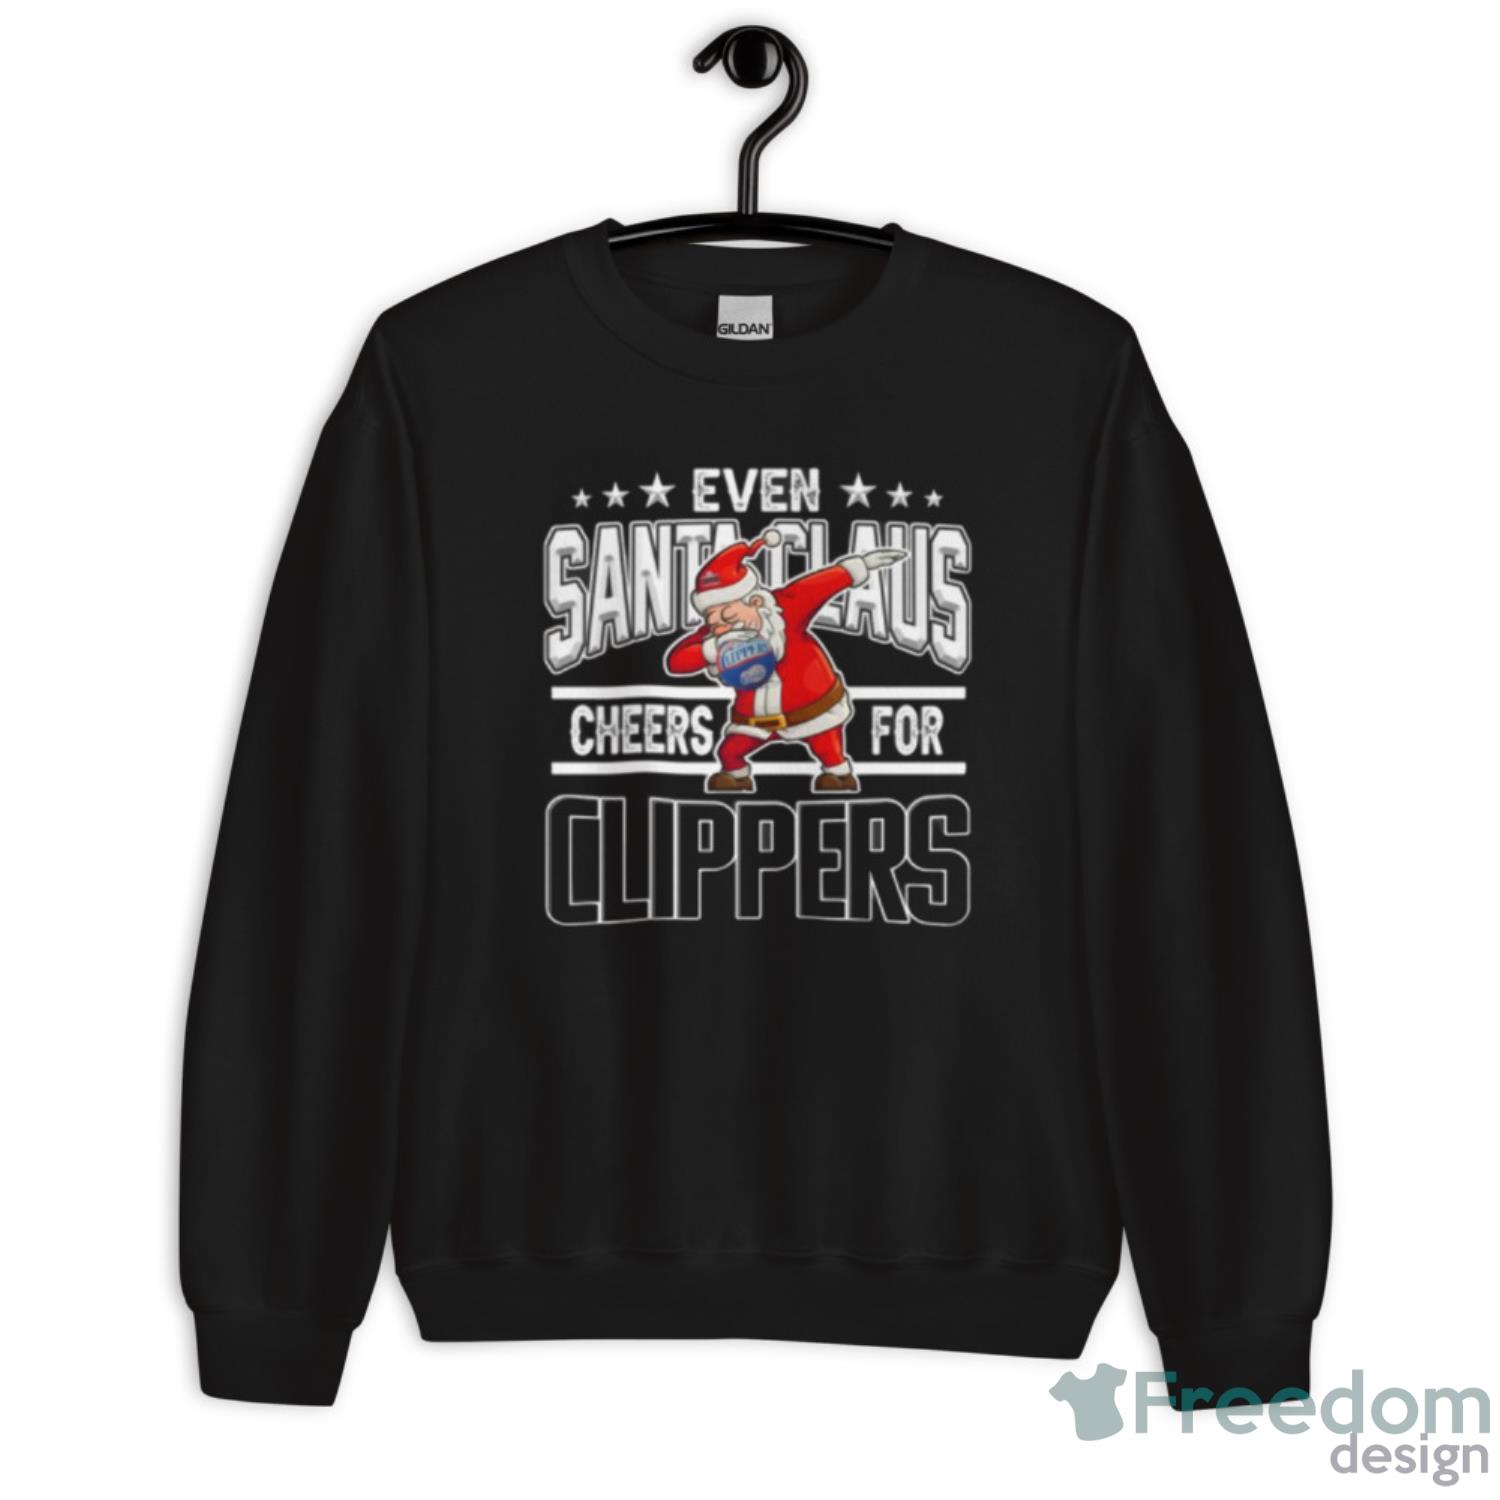 Los Angeles Clippers City Edition Shirt - Freedomdesign